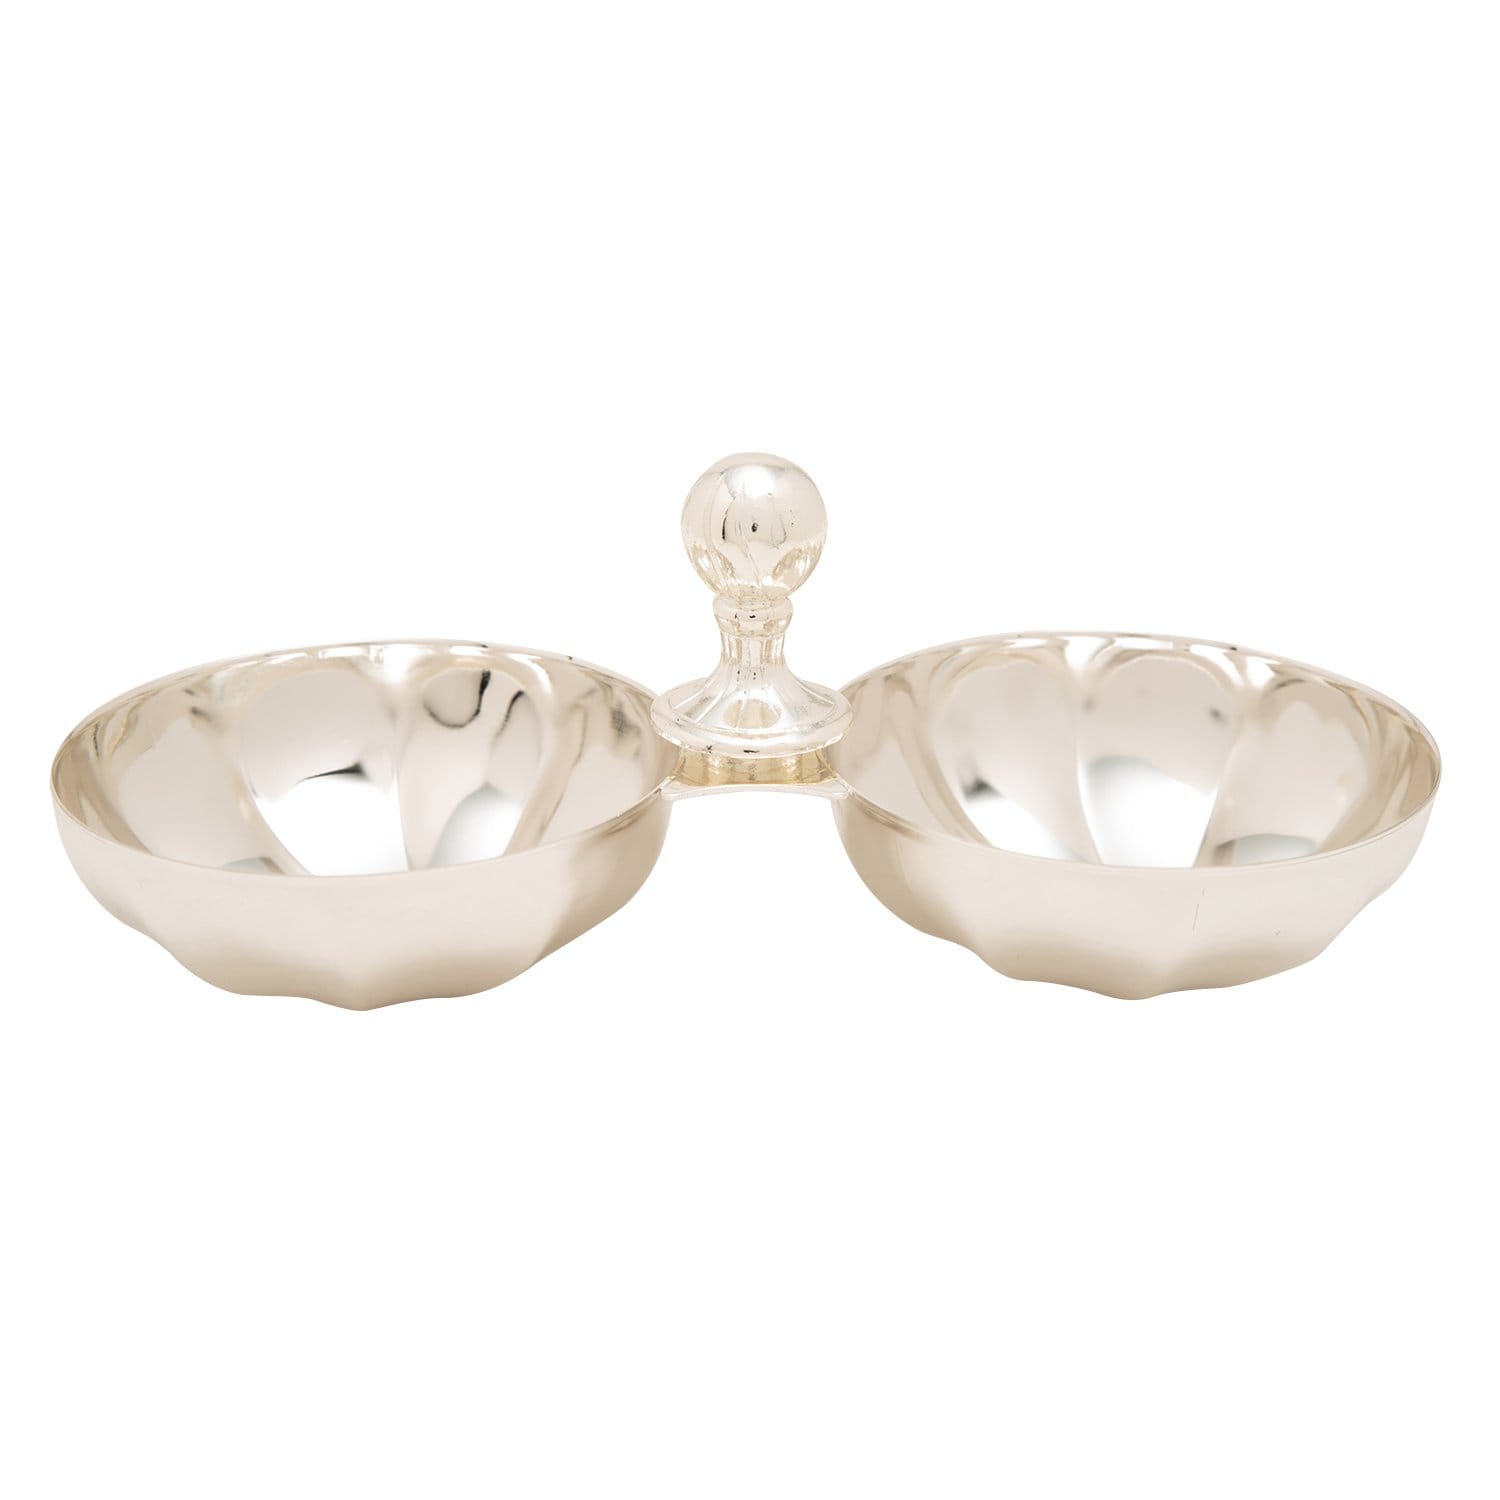 SILVERPLATED DOUBLE CANDY BOWL